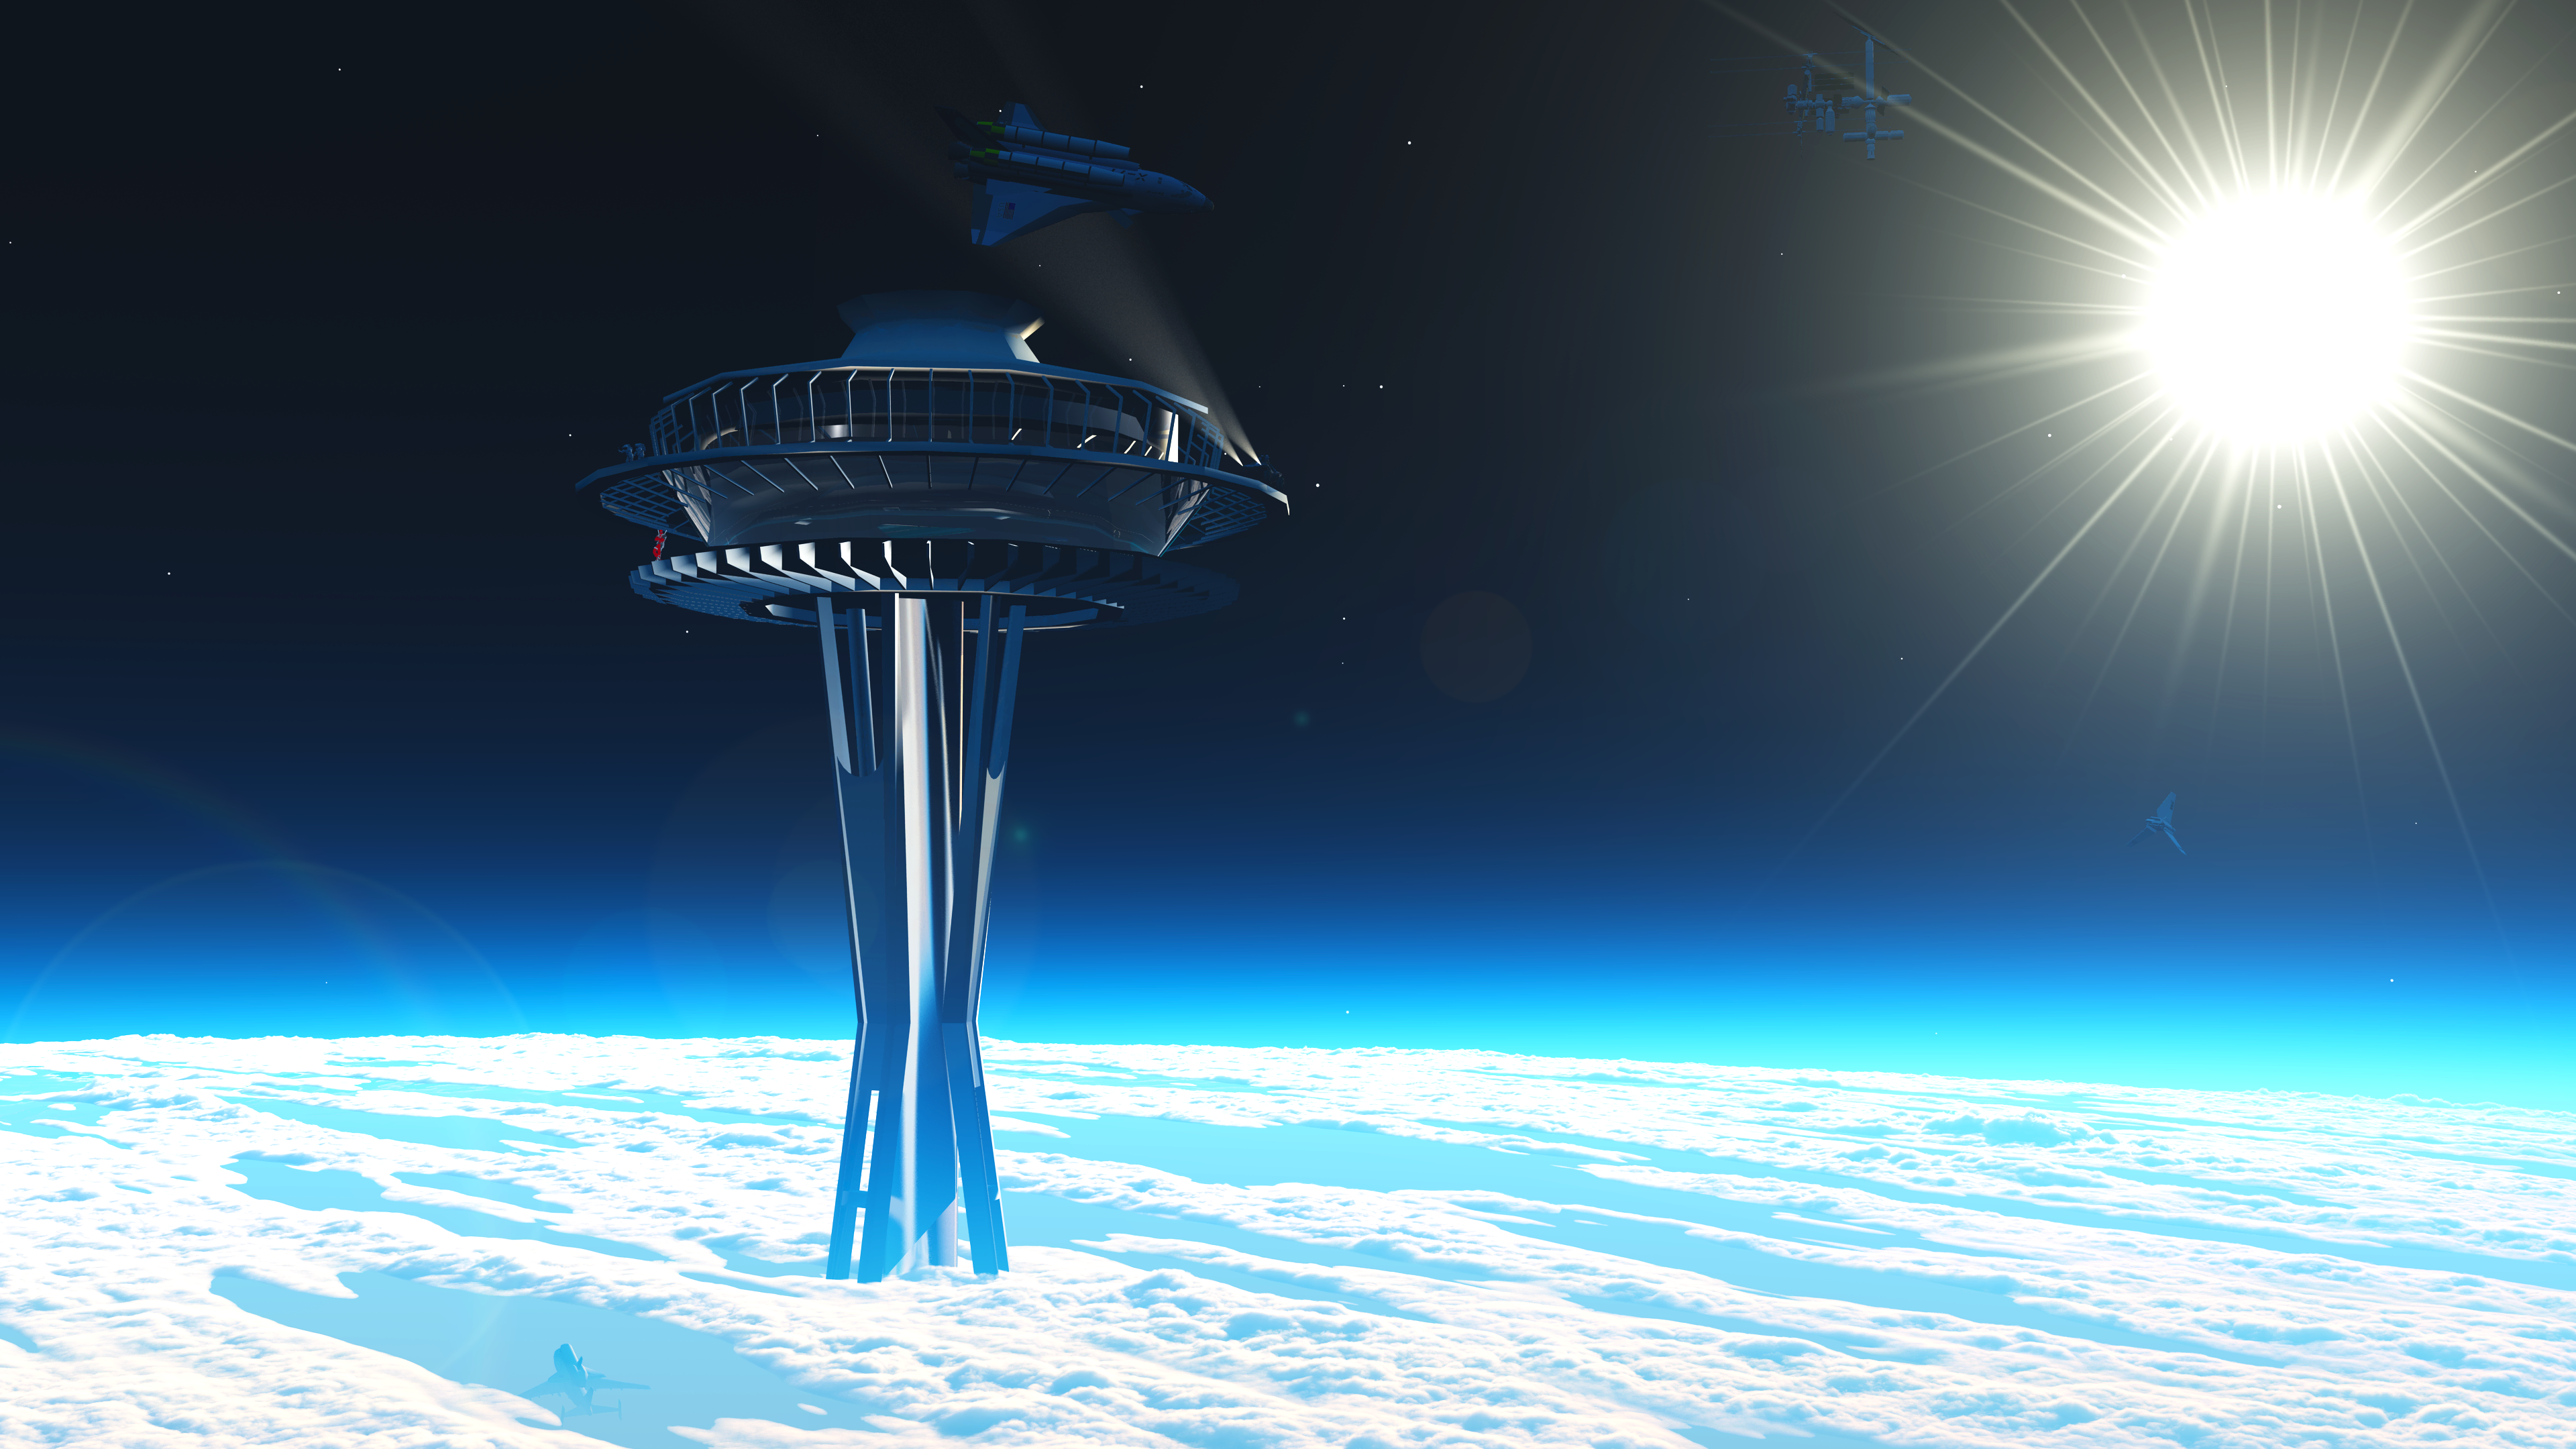 SpaceElevator_seattle_space_elevator_observatory_by_alterbr33d-d5j8j2p